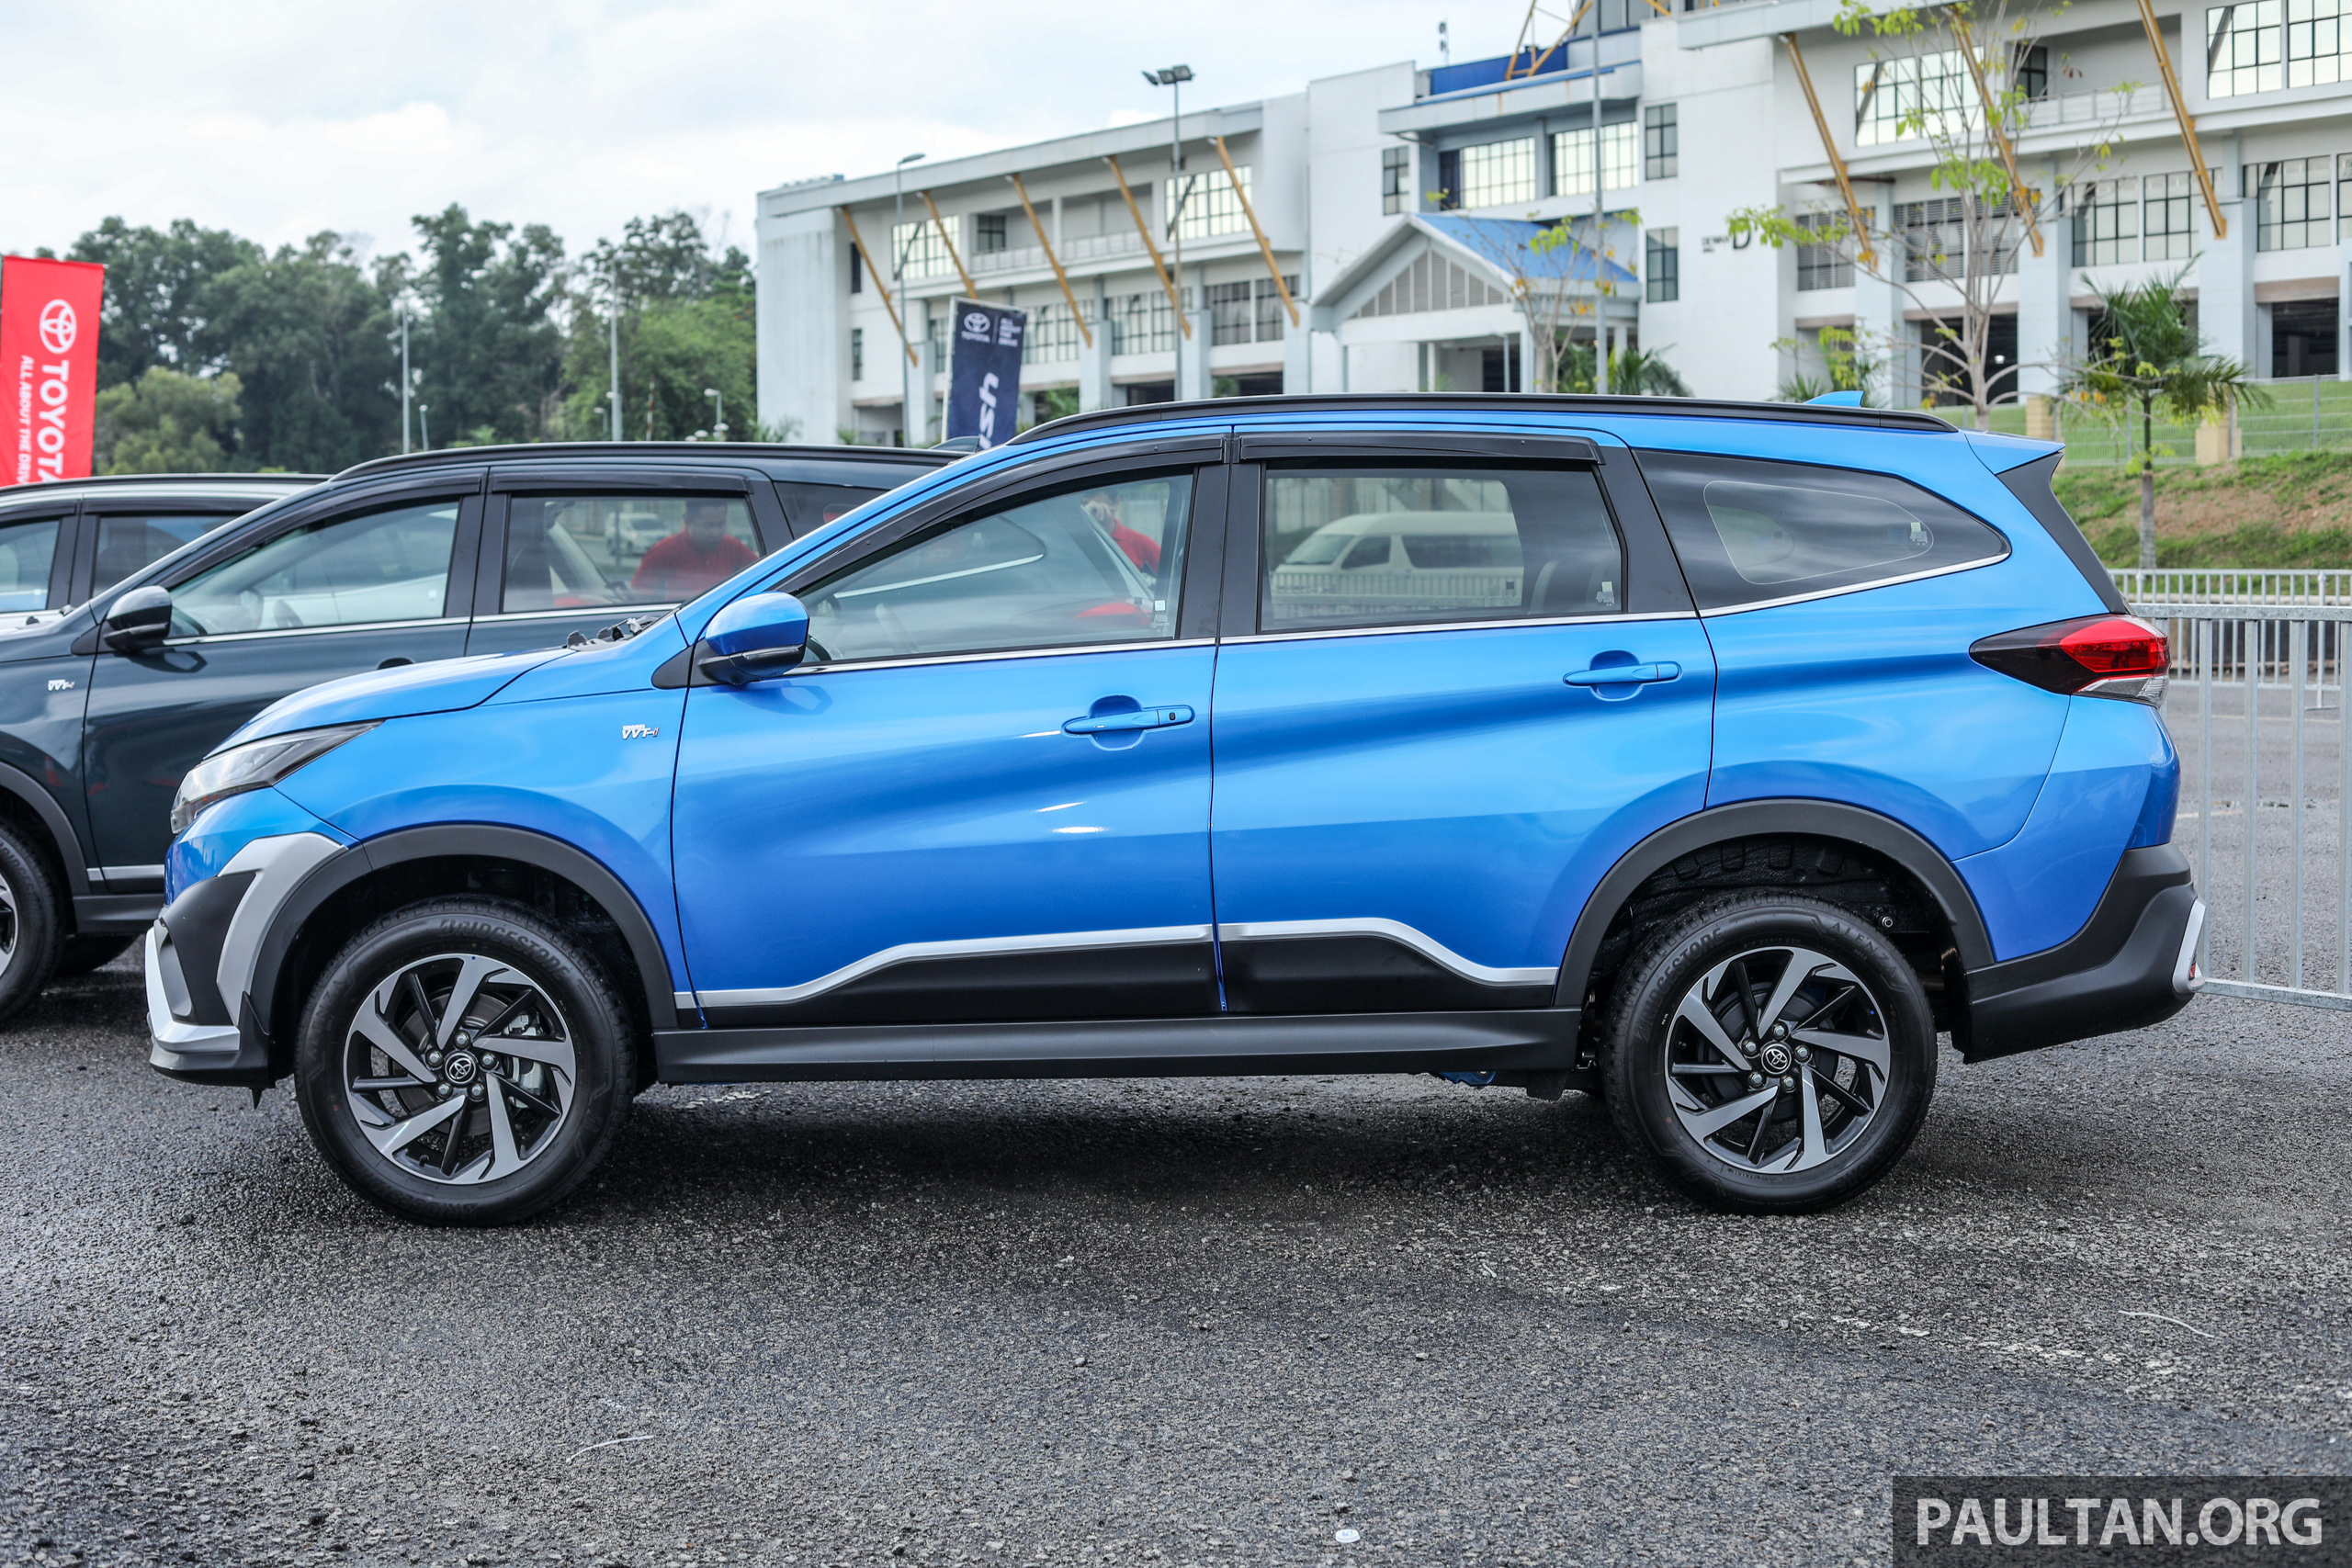 2019 Toyota  Rush  launched in Malaysia new 1 5L engine 